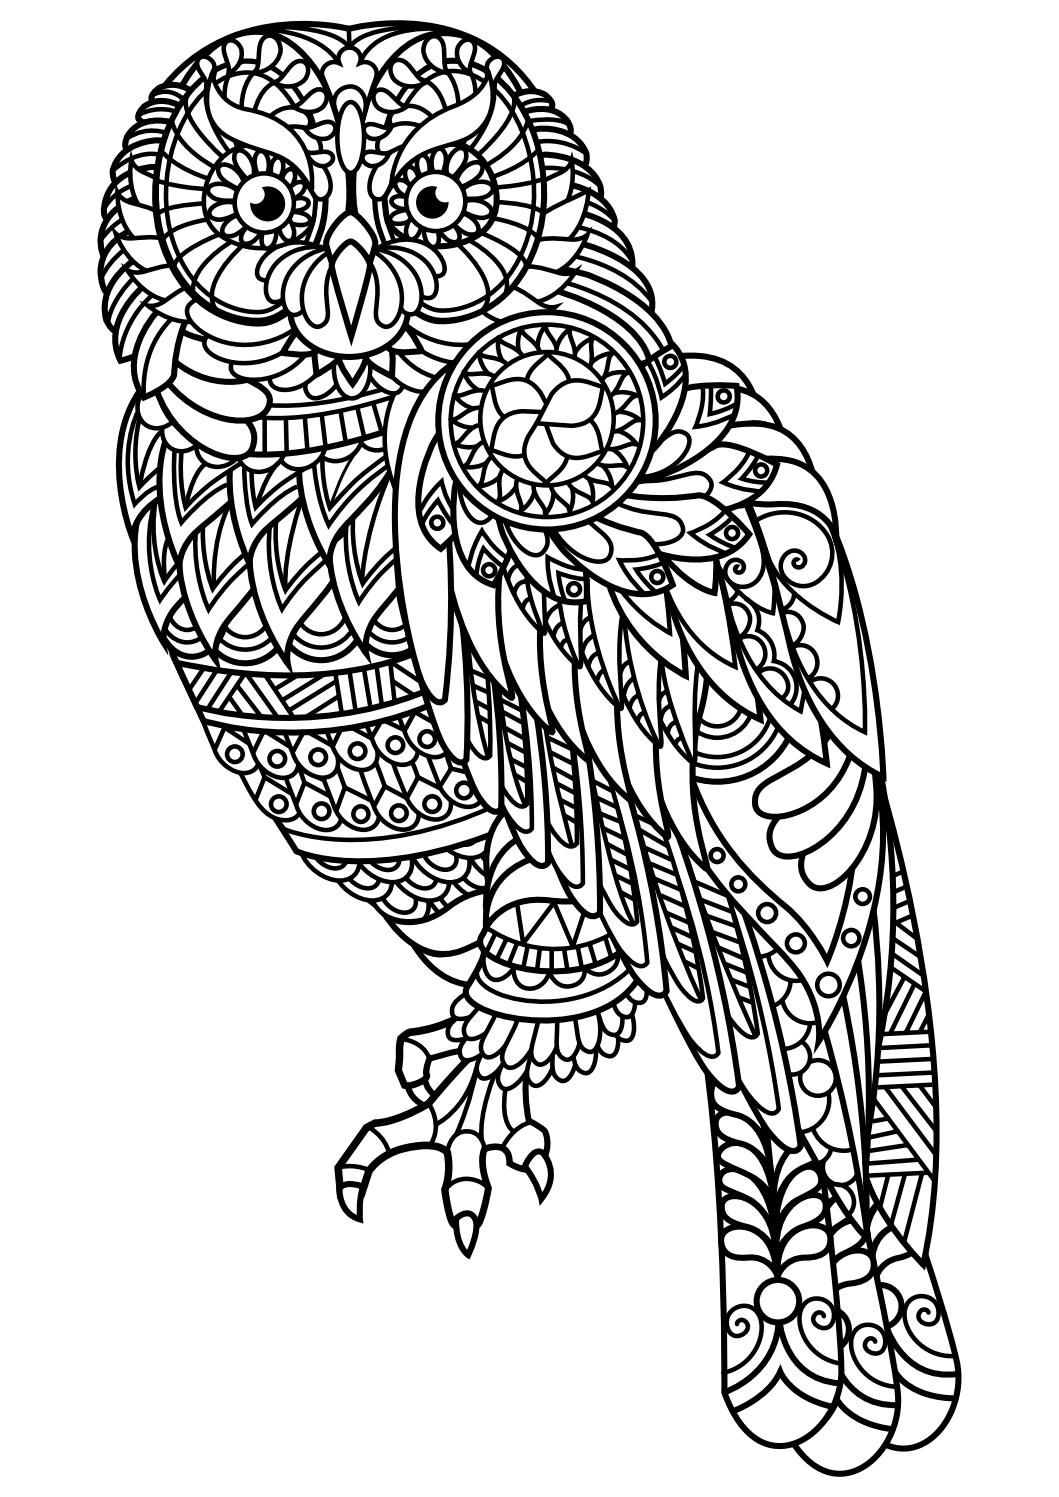 Animal coloring pages pdf (With images) | Bird coloring pages ...